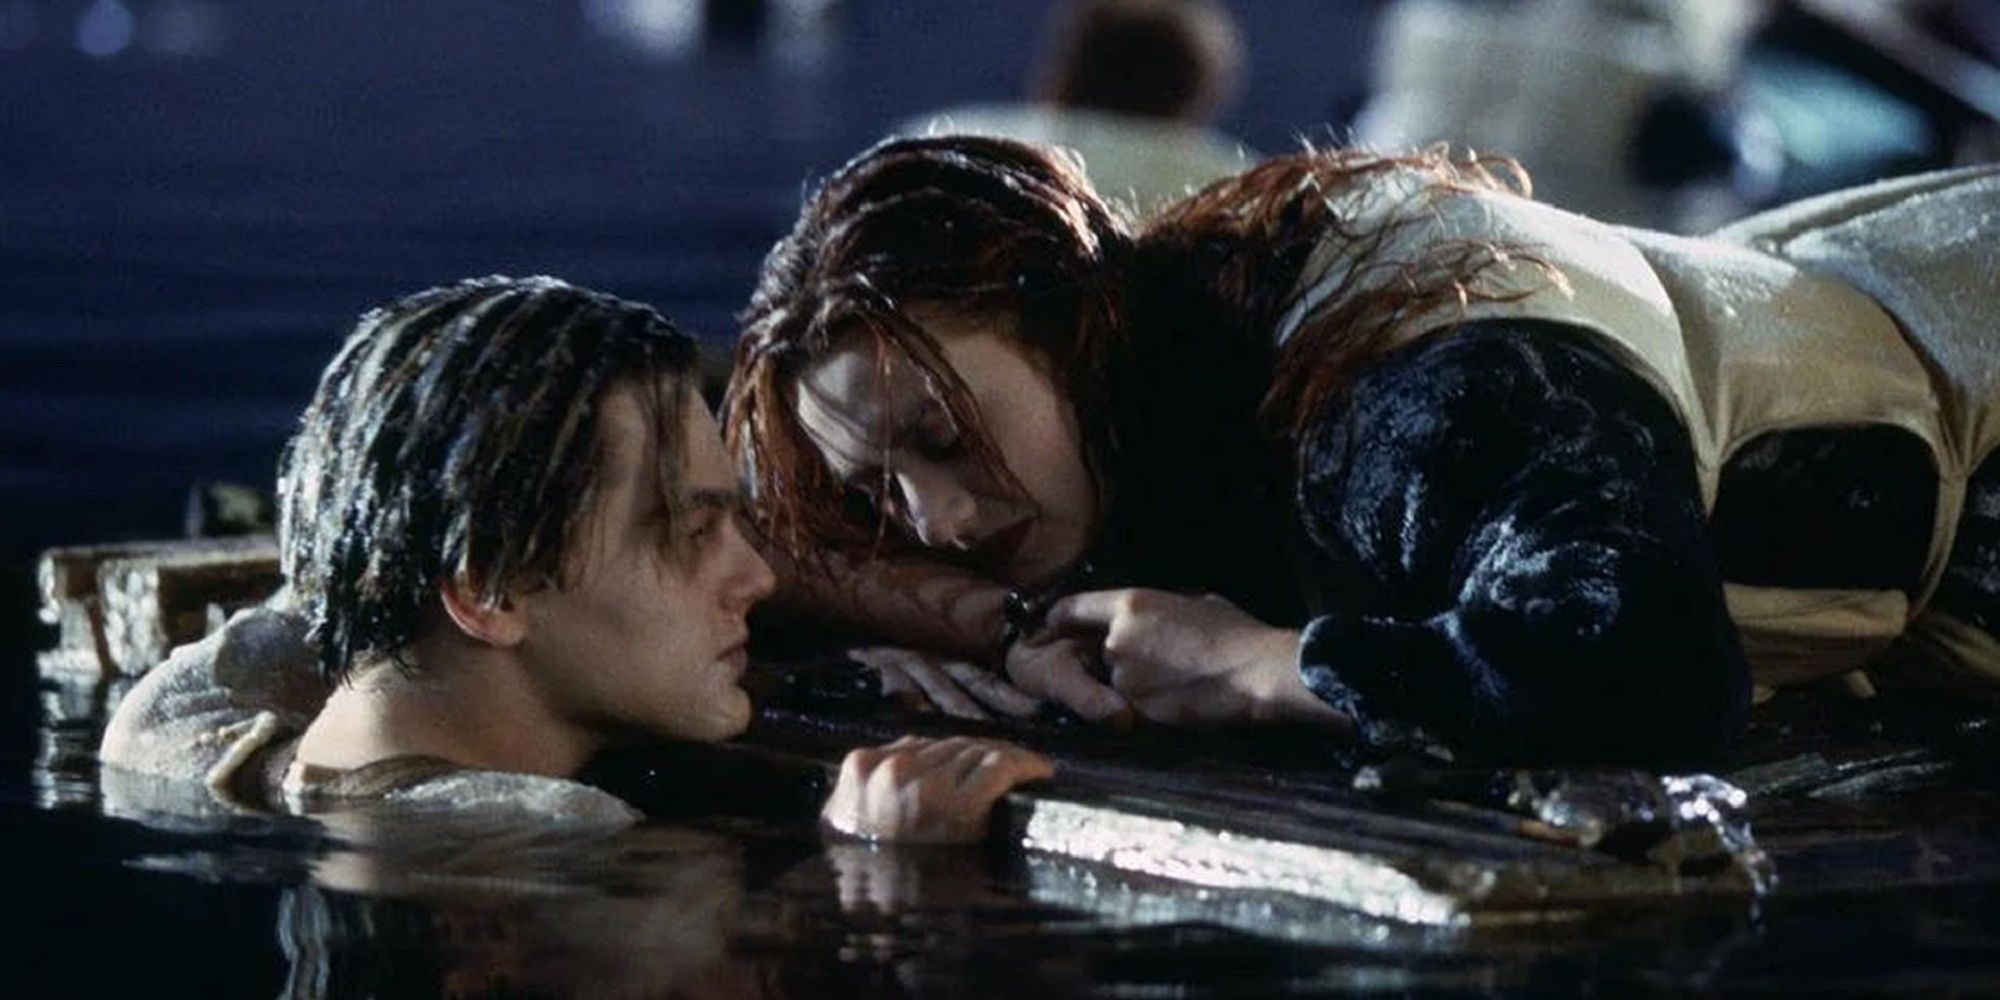 Jack and Rose on the wooden door at the end of Titanic.